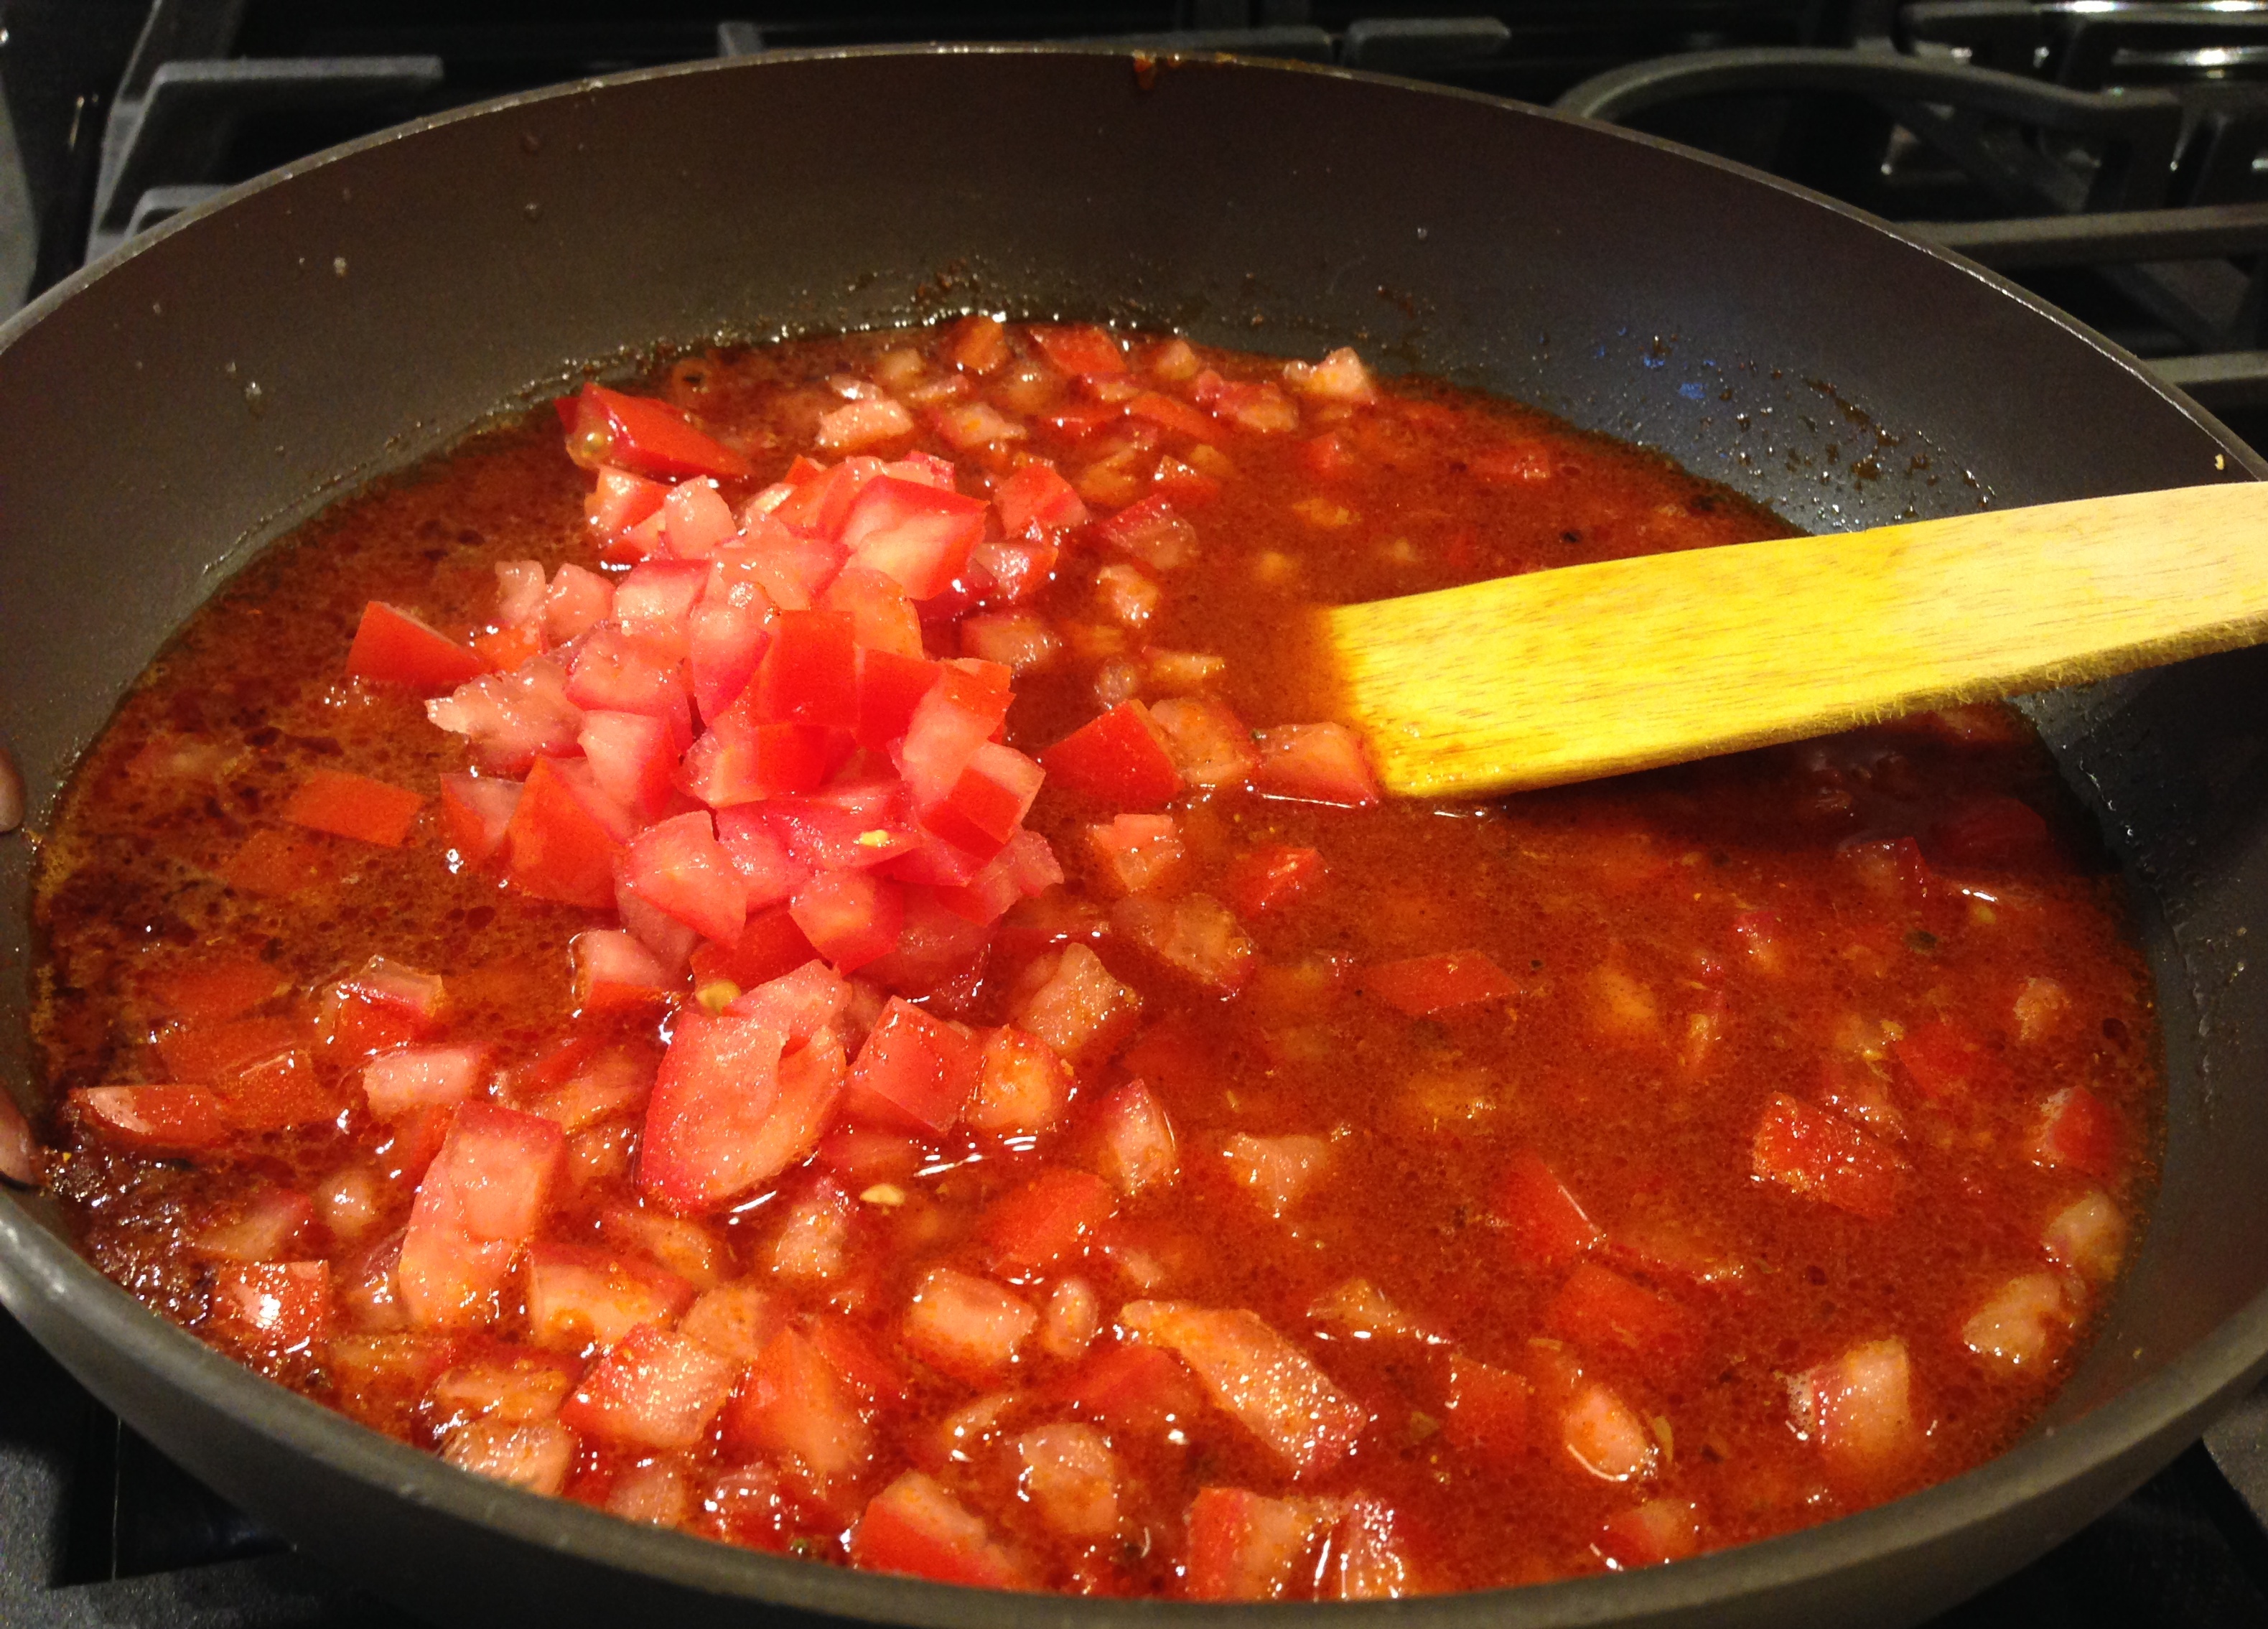 Add tomatoes to sauce